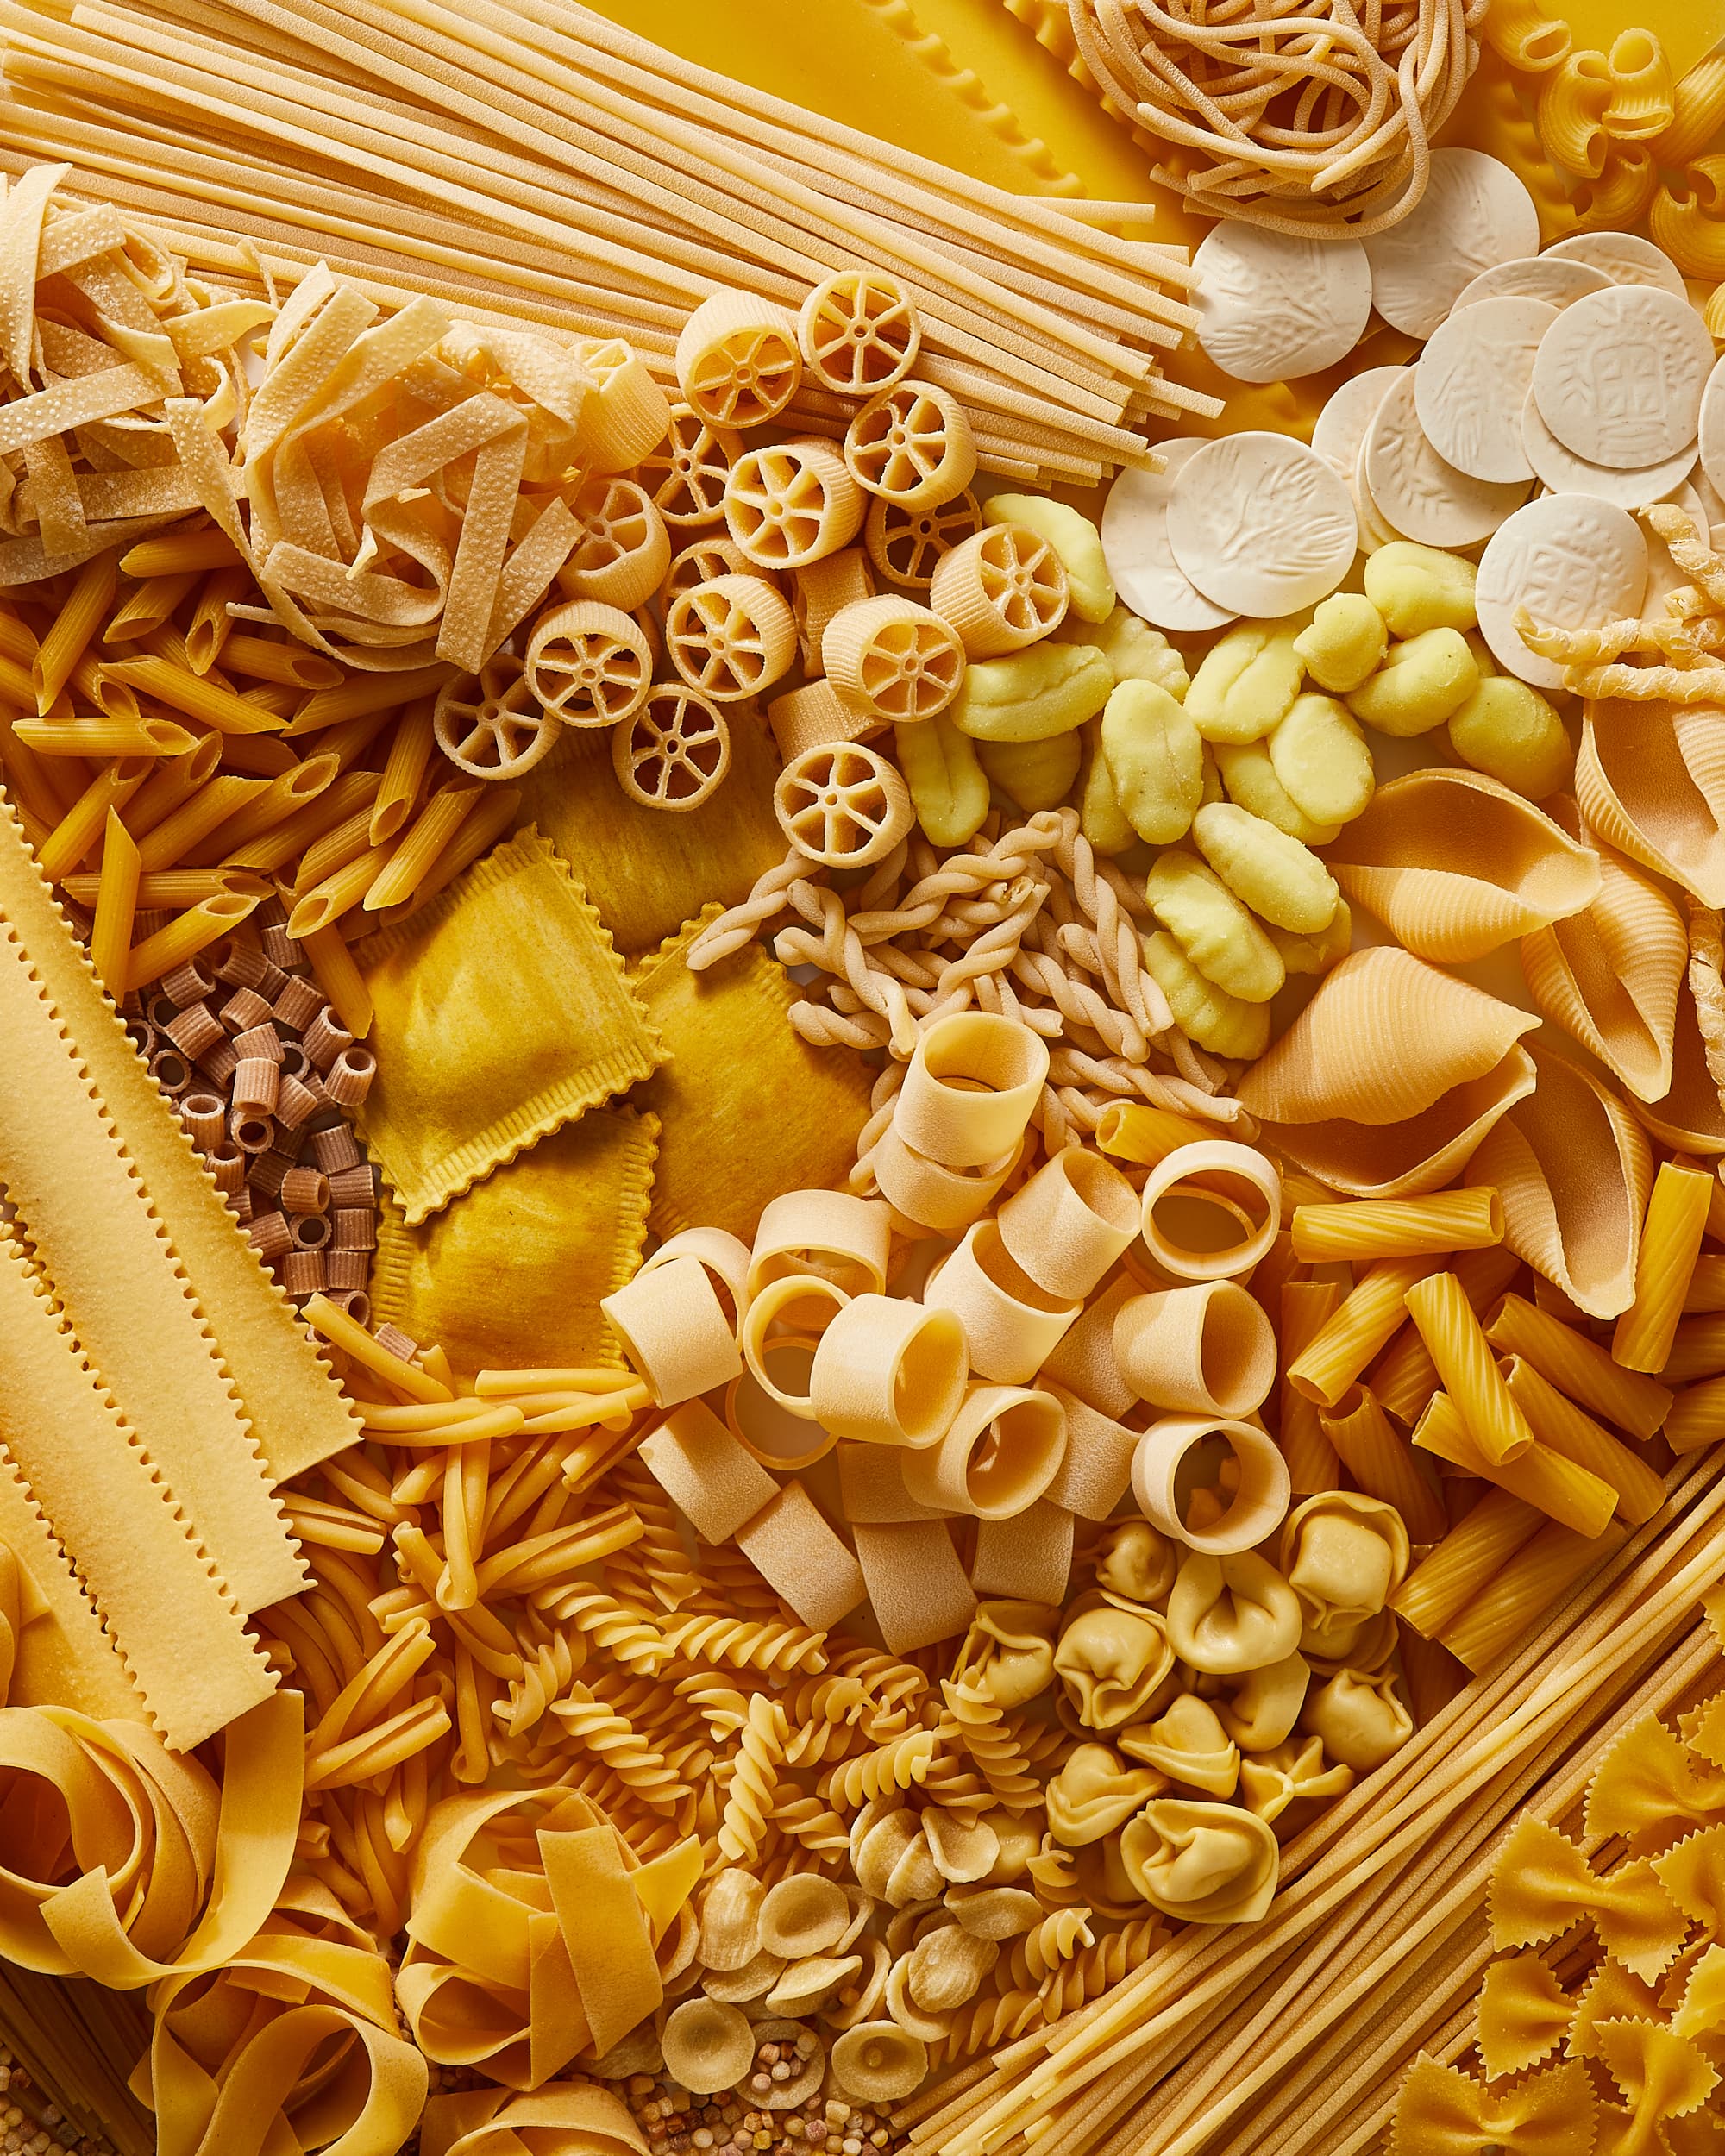 The Best Tools for Homemade Pasta of All Different Shapes